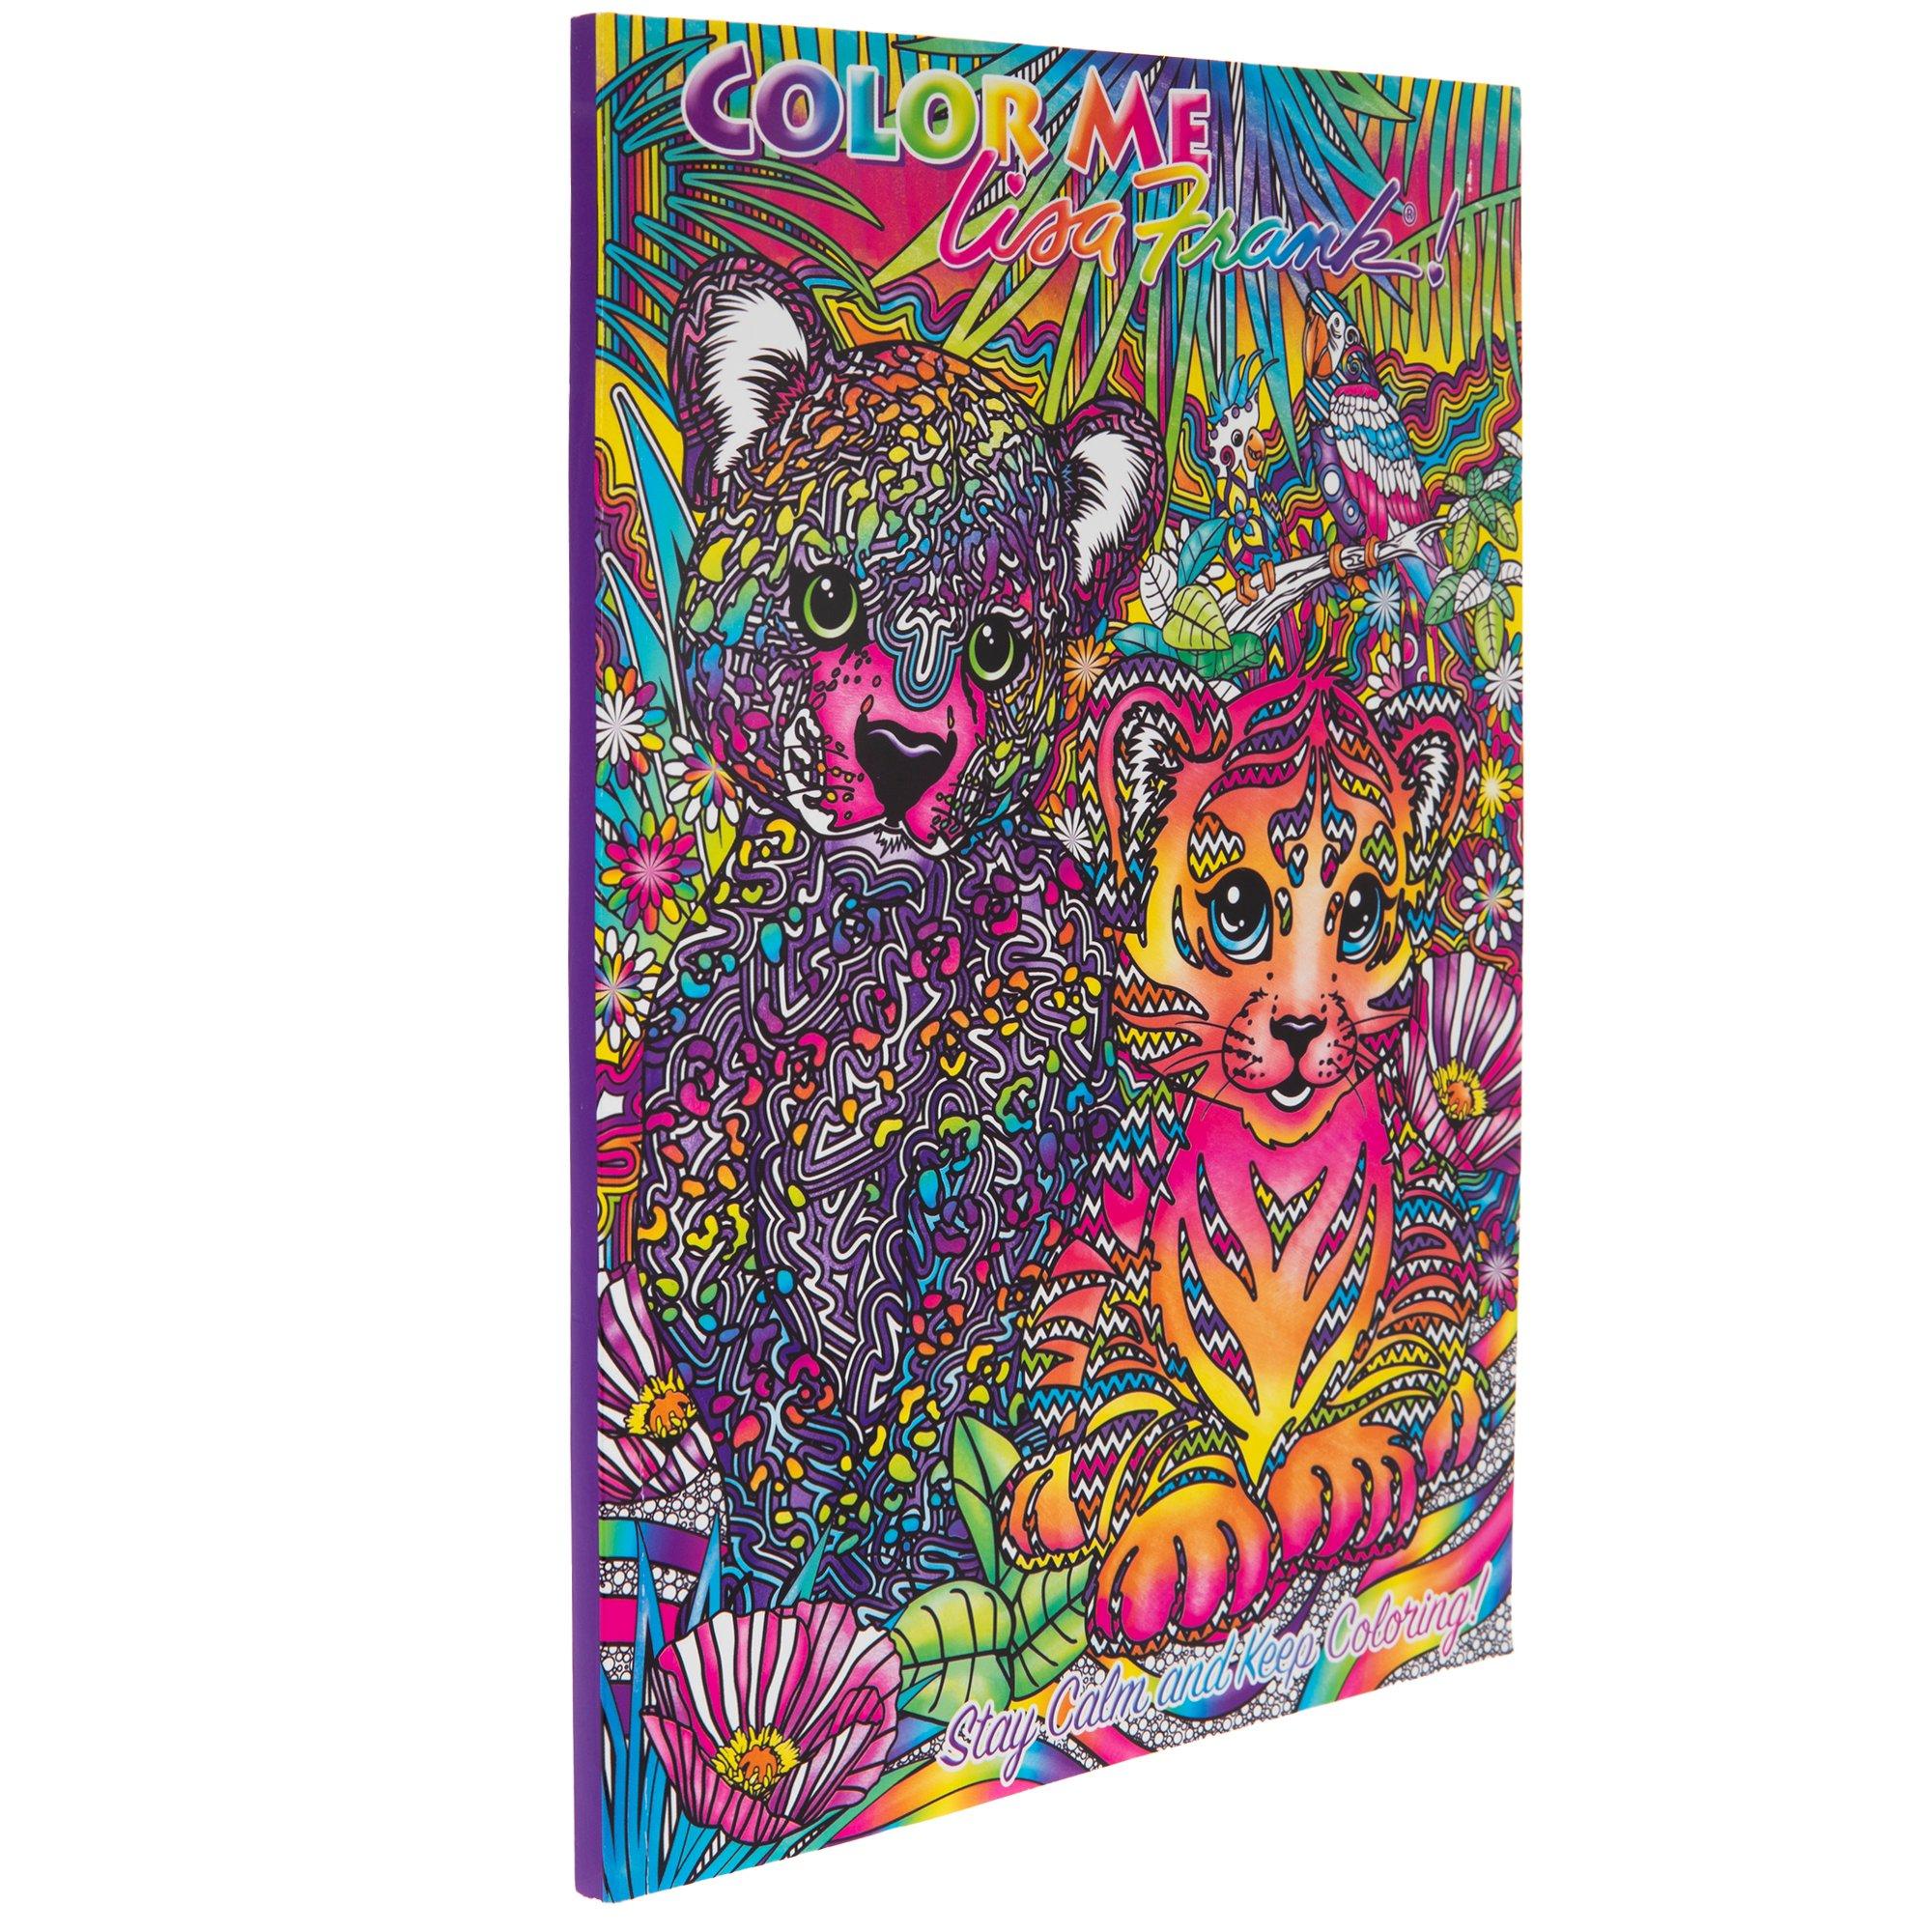  Lisa Frank Stoner Coloring Book: Psychedelic Coloring Books For  Adults, Lisa Frank Coloring Book For Stress Relief And Relaxation:  9798799693275: Julia, Dusica: Books